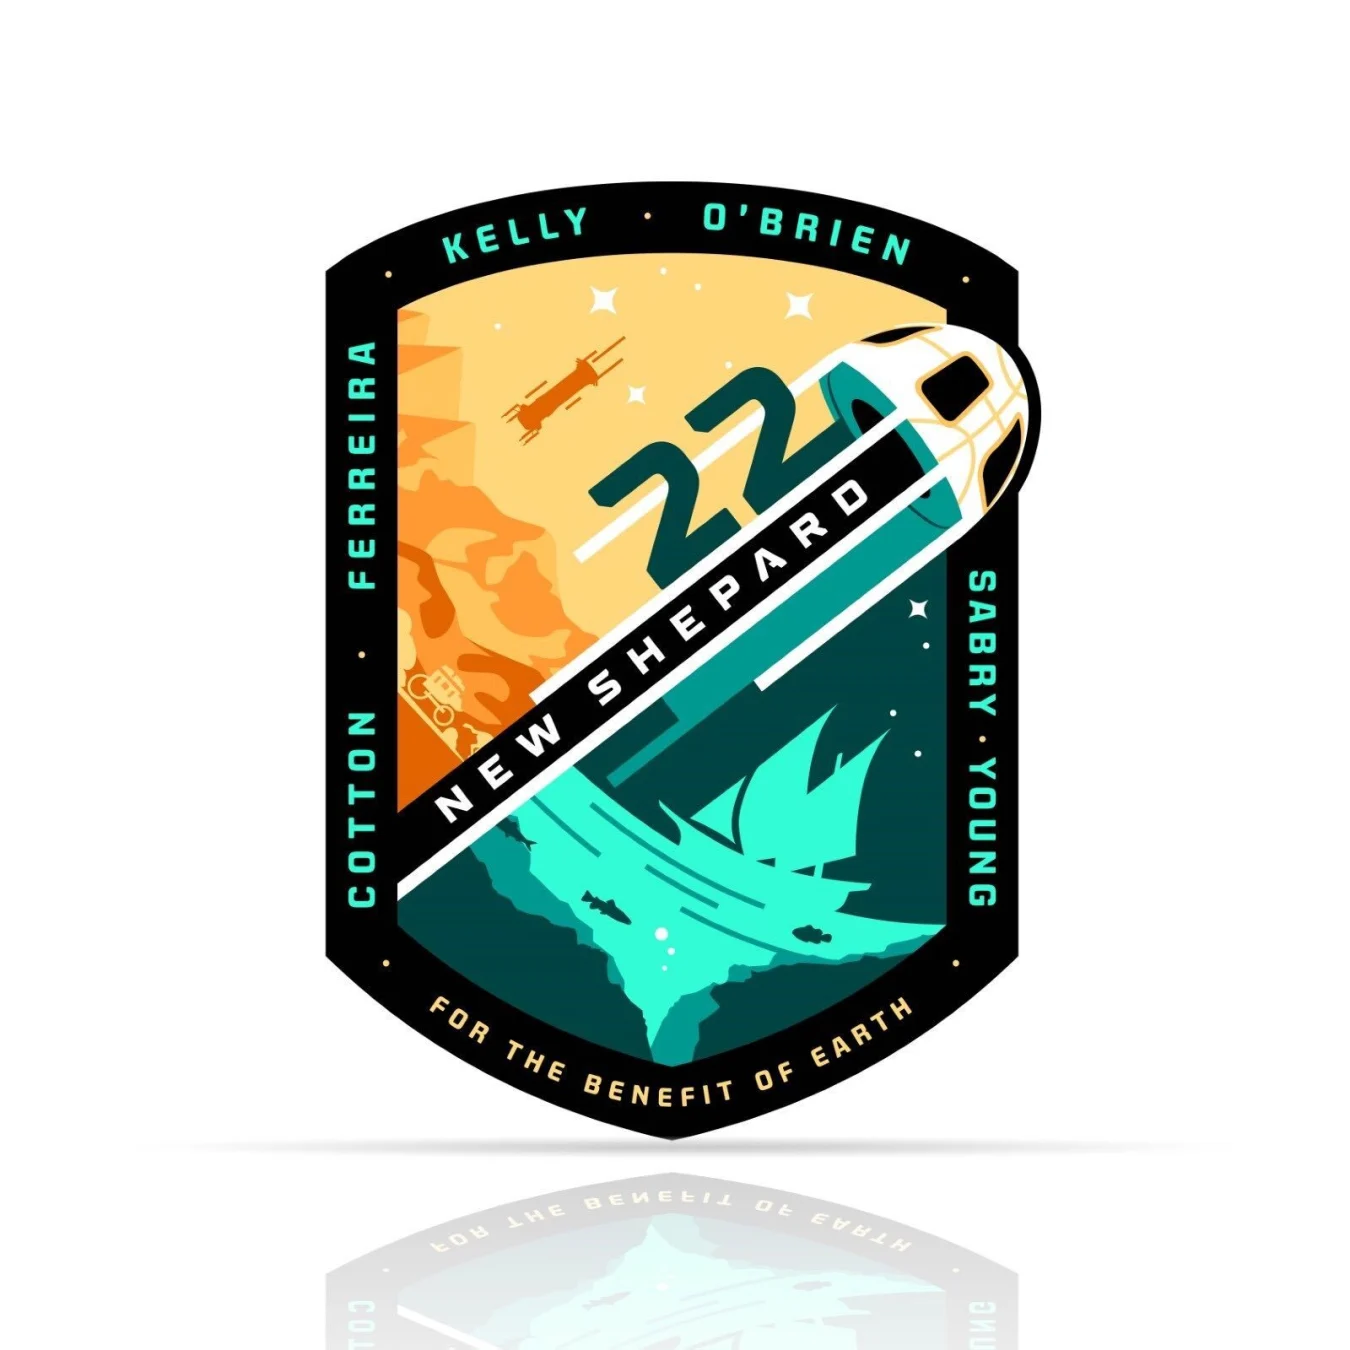 The mission patch for the New Shepard NS-22 mission. It includes symbols such as: The Pyramids of Egypt represent Sara Sabry's legacy and celebrate her achievement as the country's first female astronaut. The Mariana Trench represents Vanessa O'Brien's feat of reaching Challenger Deep, the lowest point on earth. The team capsule is depicted as a basketball, symbolizing Dude Perfect's trick shots and Coby Cotton's role in co-founding the company. Magellan's Ship represents Mário Ferreira's Portuguese heritage and lifelong passion for adventure. The fish swimming beneath Magellan's ship symbolize Steve Young's passion for fishing. The stagecoach represents Clint Kelly III's quest to push humanity to the new frontiers of space. The New Shepard booster and West Texas mountains are also featured in the patch.